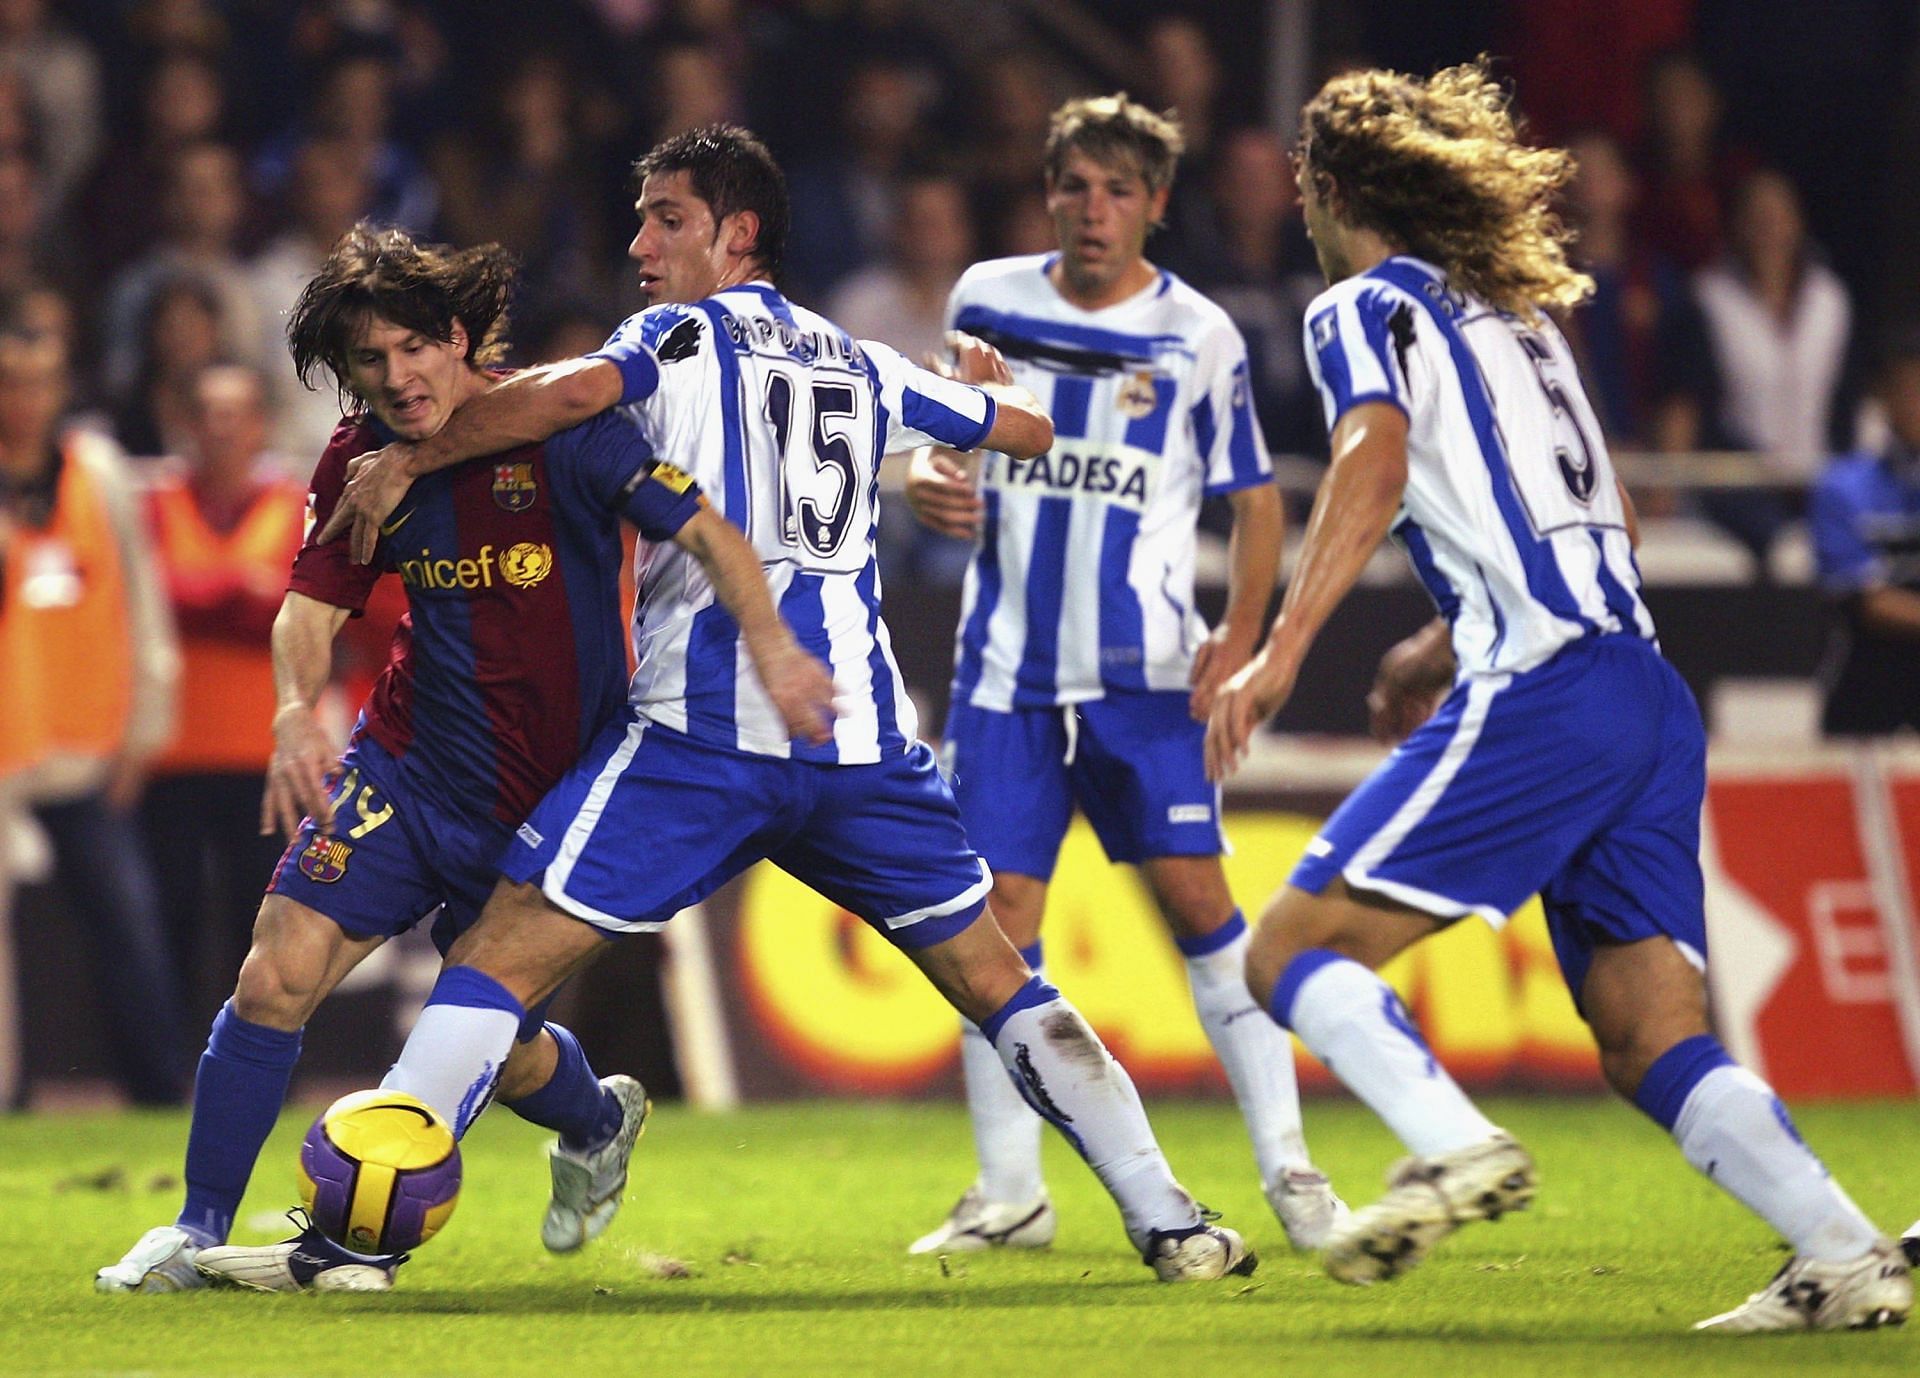 Lionel Messi was called upon by the senior team manager at a very young age